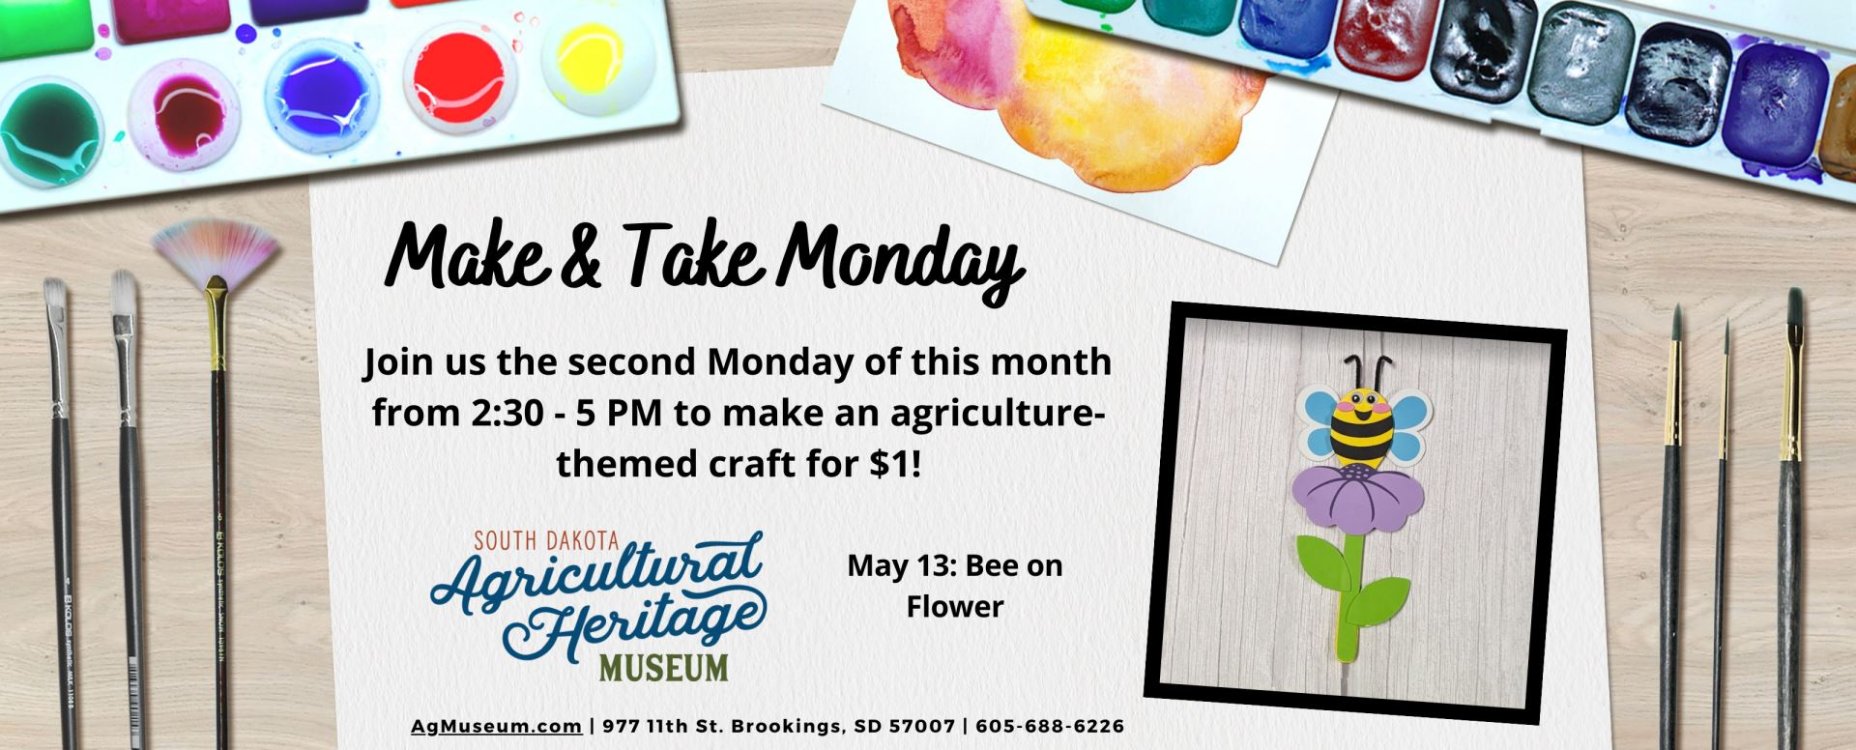 Join us on May 13 from 2:30 - 5:00 PM for Make & Take Monday!  This month, you can stop by and make a bee and flower craft for $1.